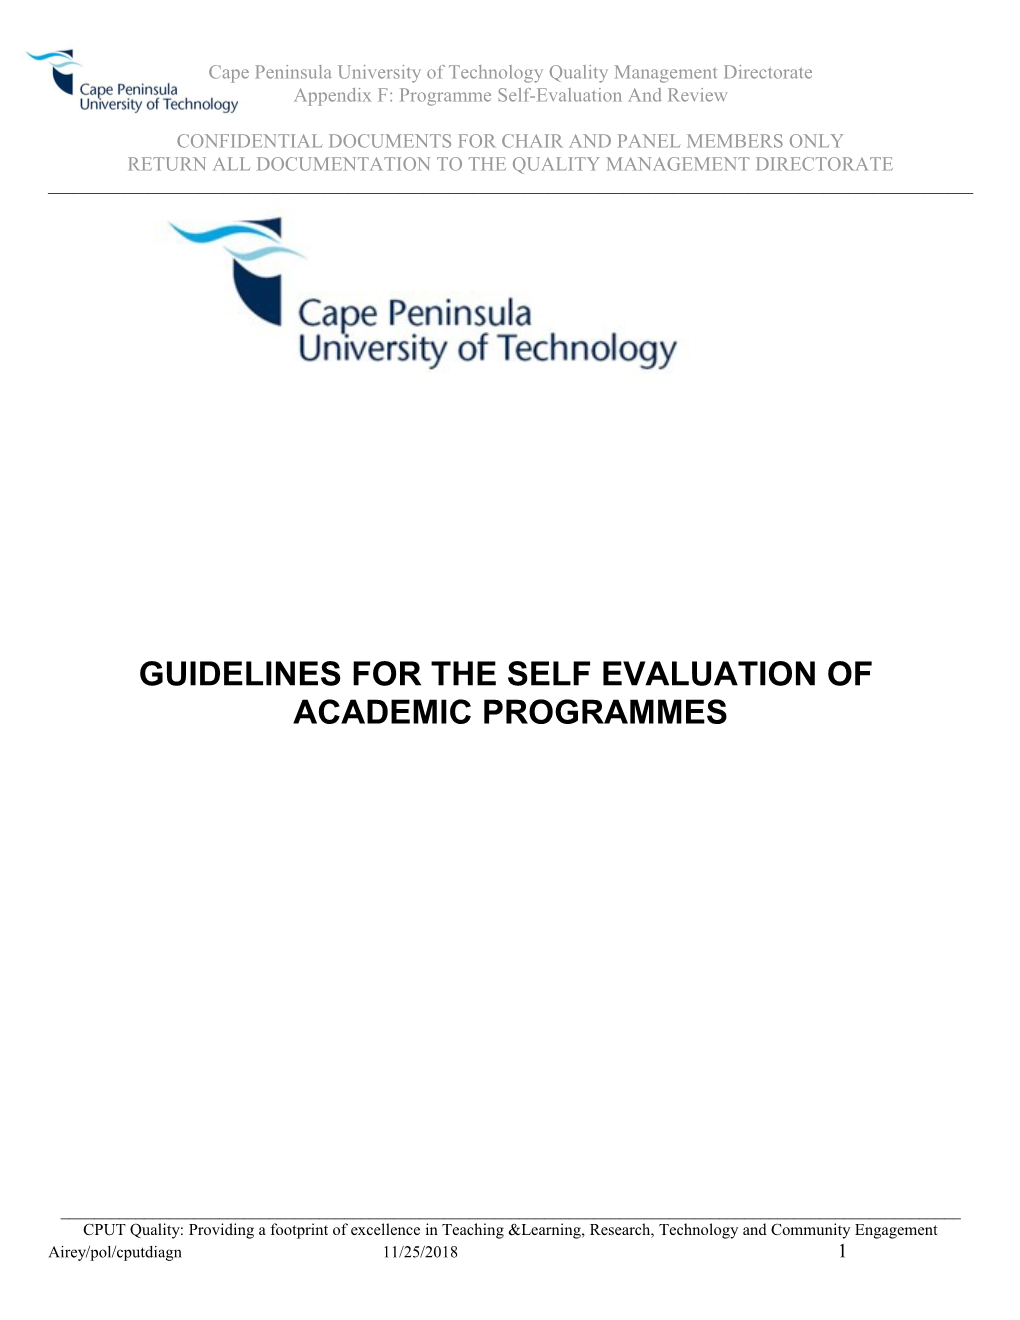 Guidelines for Biomedical Technology